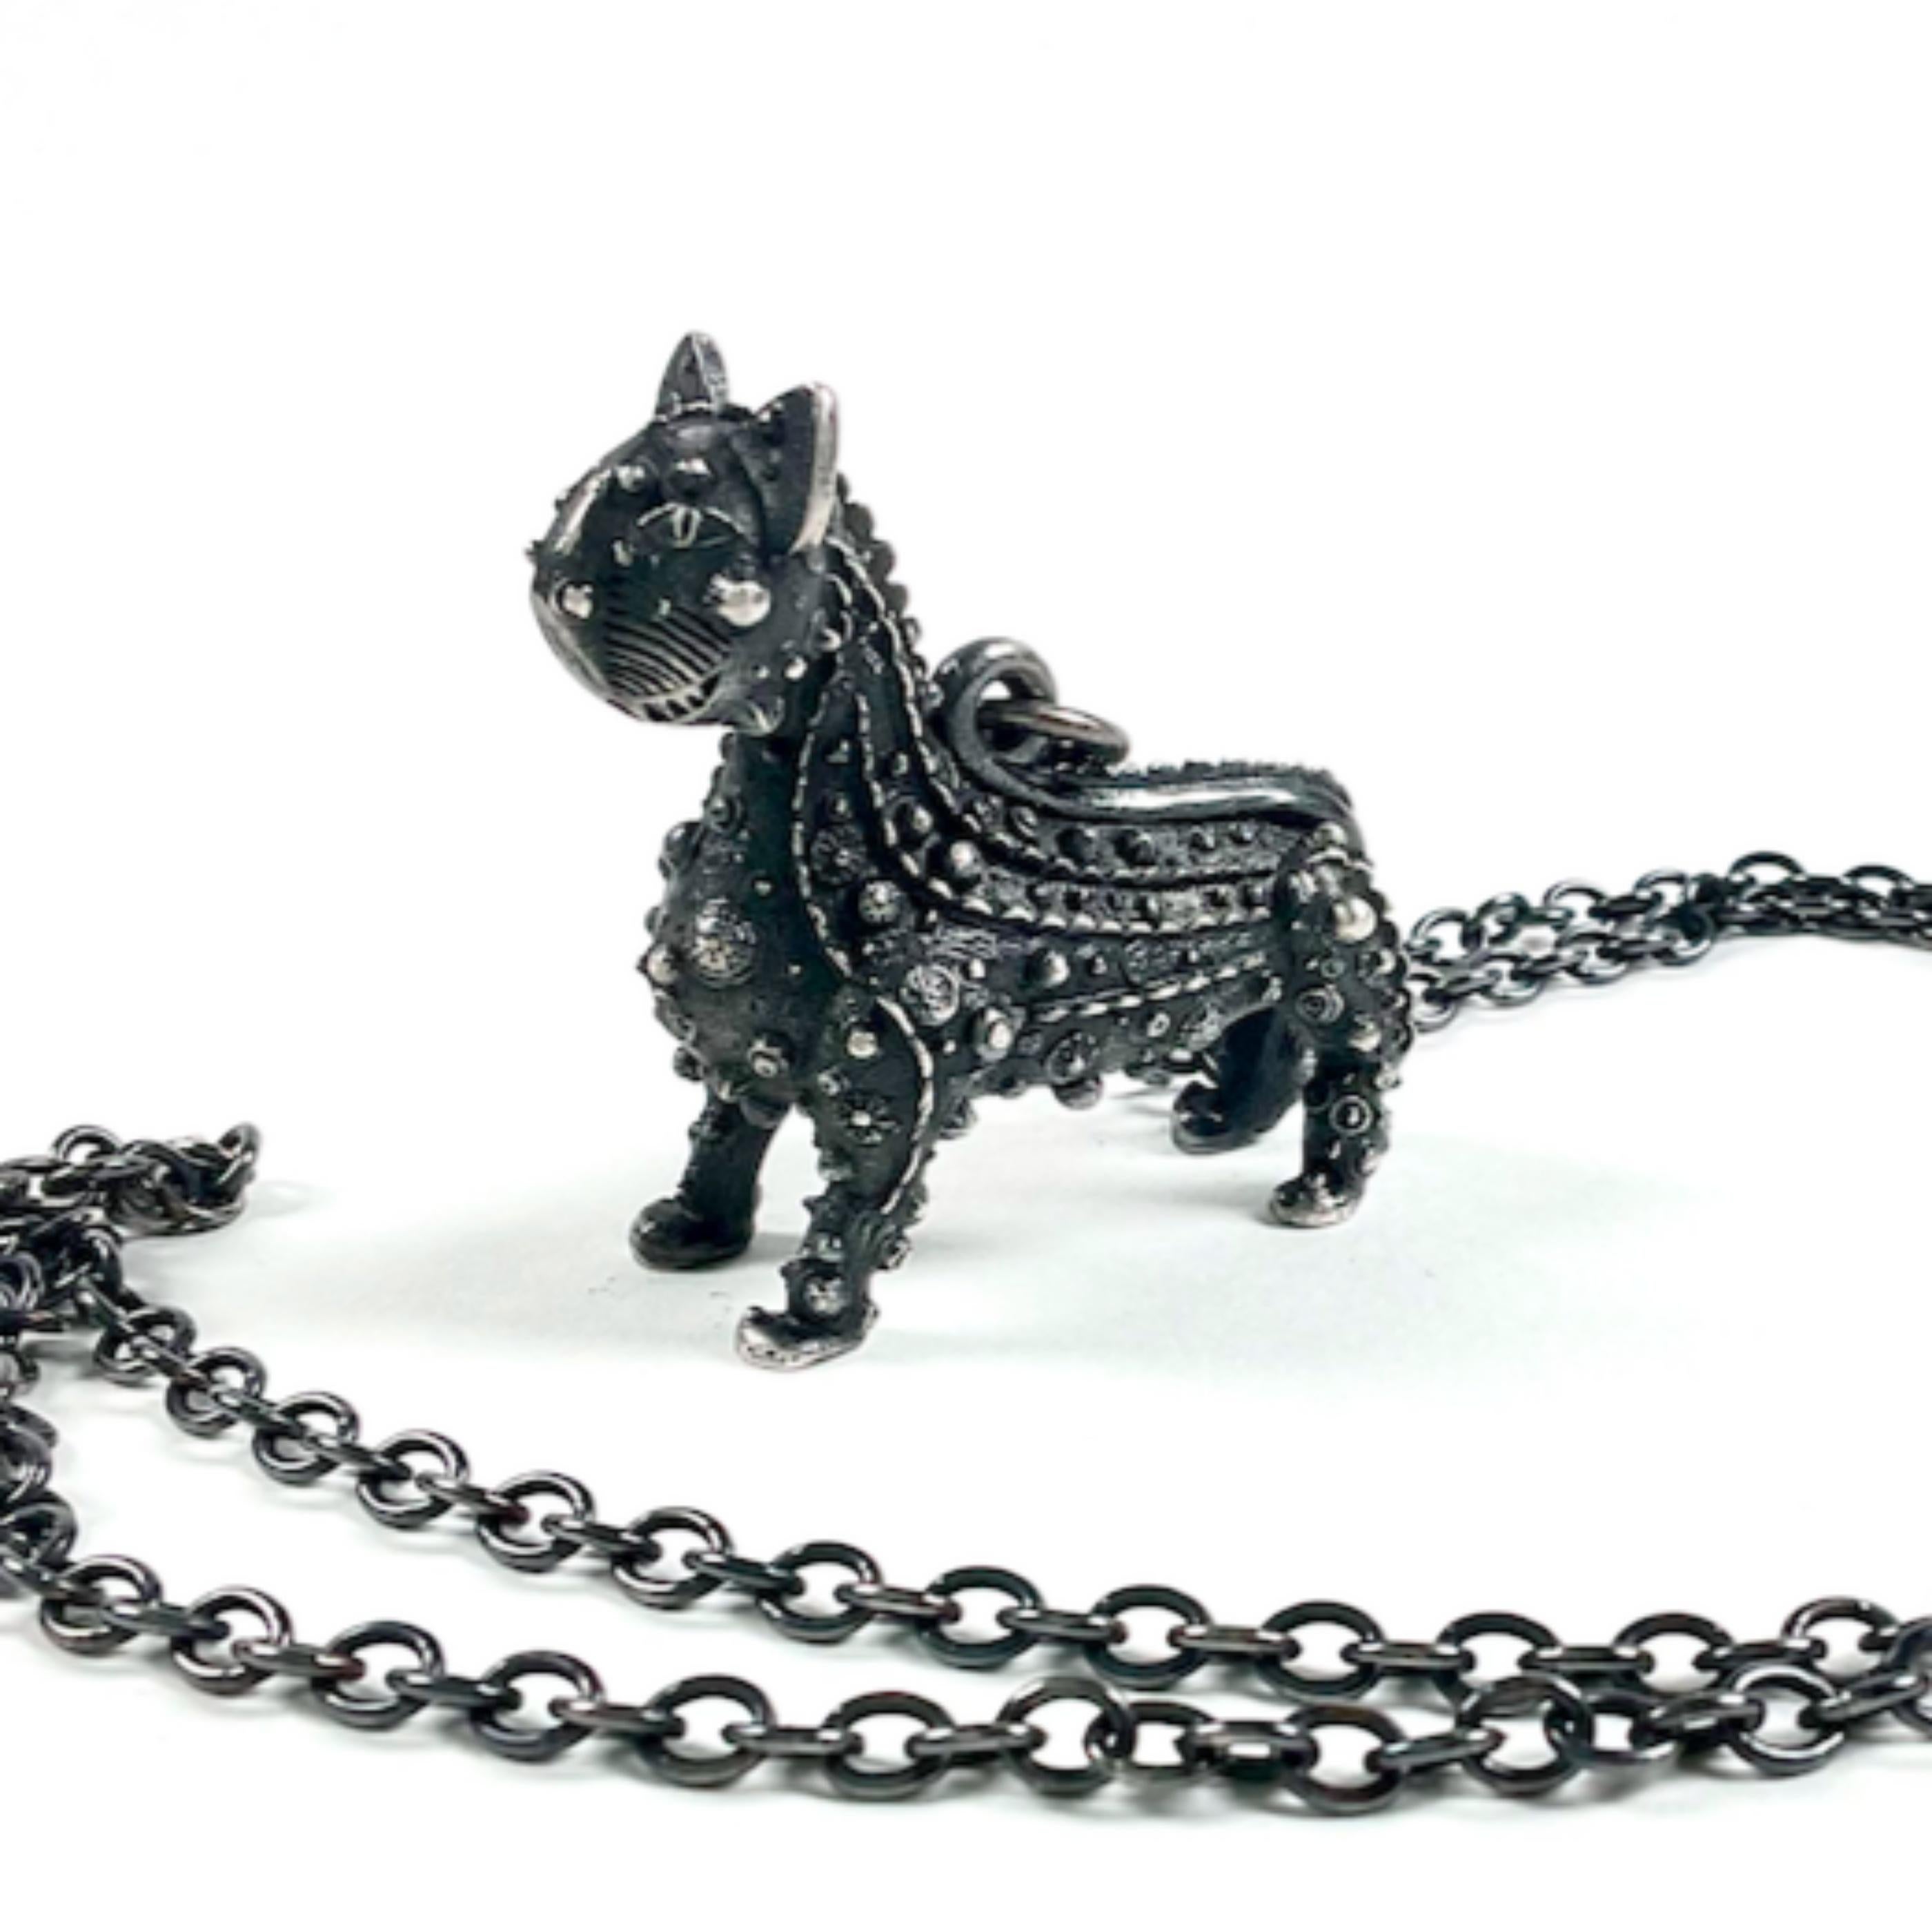 Chris Whitty's Cat Limited Edition silver Pendant (Necklace) - Contemporary Art by Grayson Perry